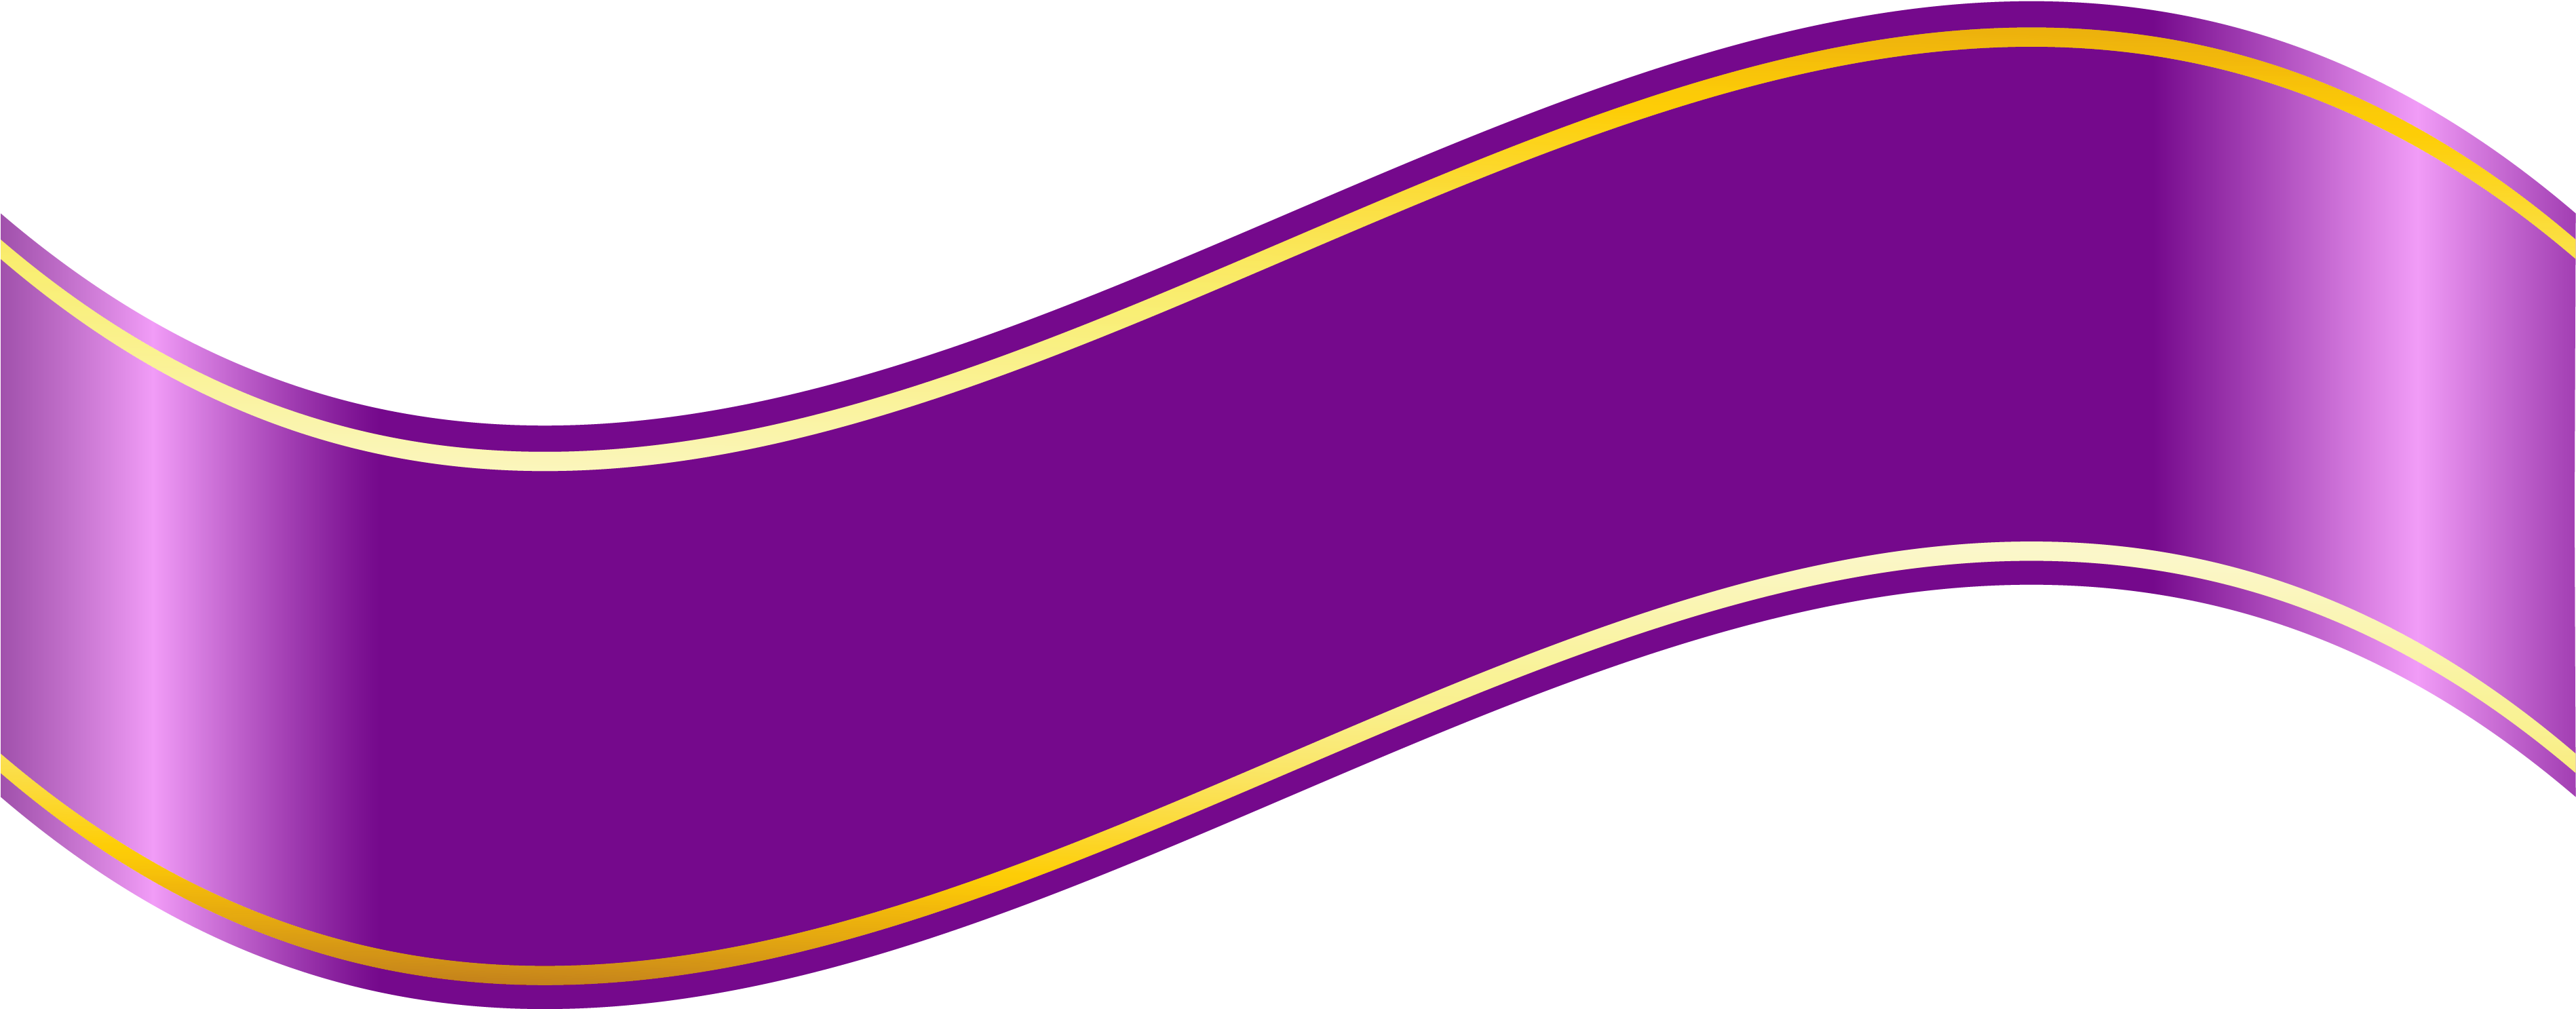 Download Purple Banner Png Clipartu200b Gallery Yopriceville - Purple  Ribbon Banner Png PNG Image with No Background 